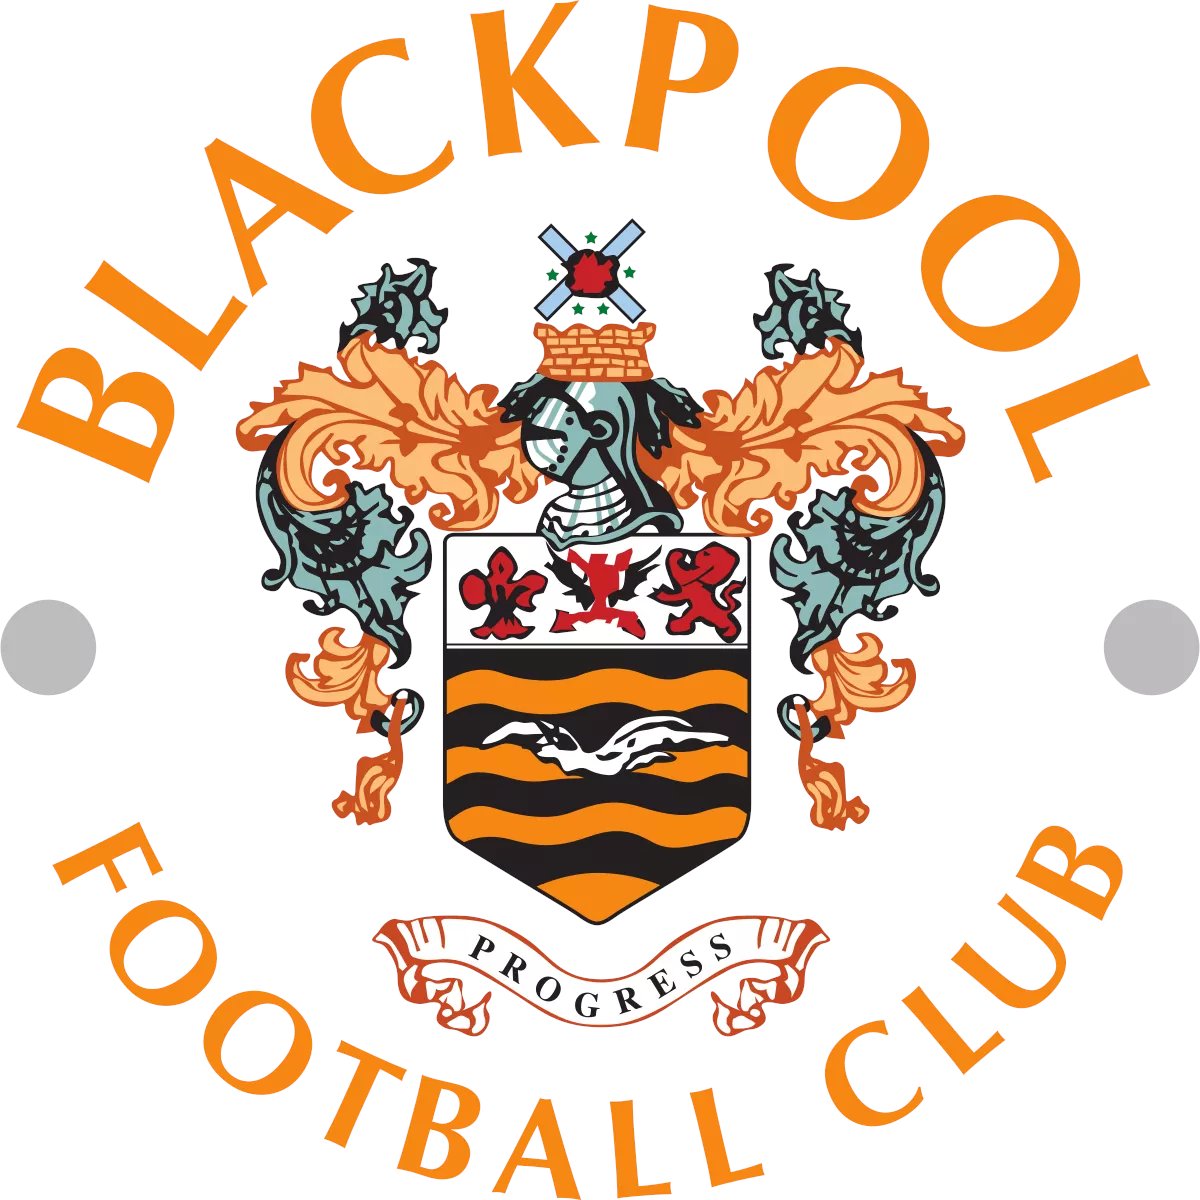 79) Blackpool Points: 76 Manager: Chris Beech We're starting to get teams that don't just have to shoehorn in random 17 year olds now. Still, Blackpool are far too reliant on Tom Barkhuizen.